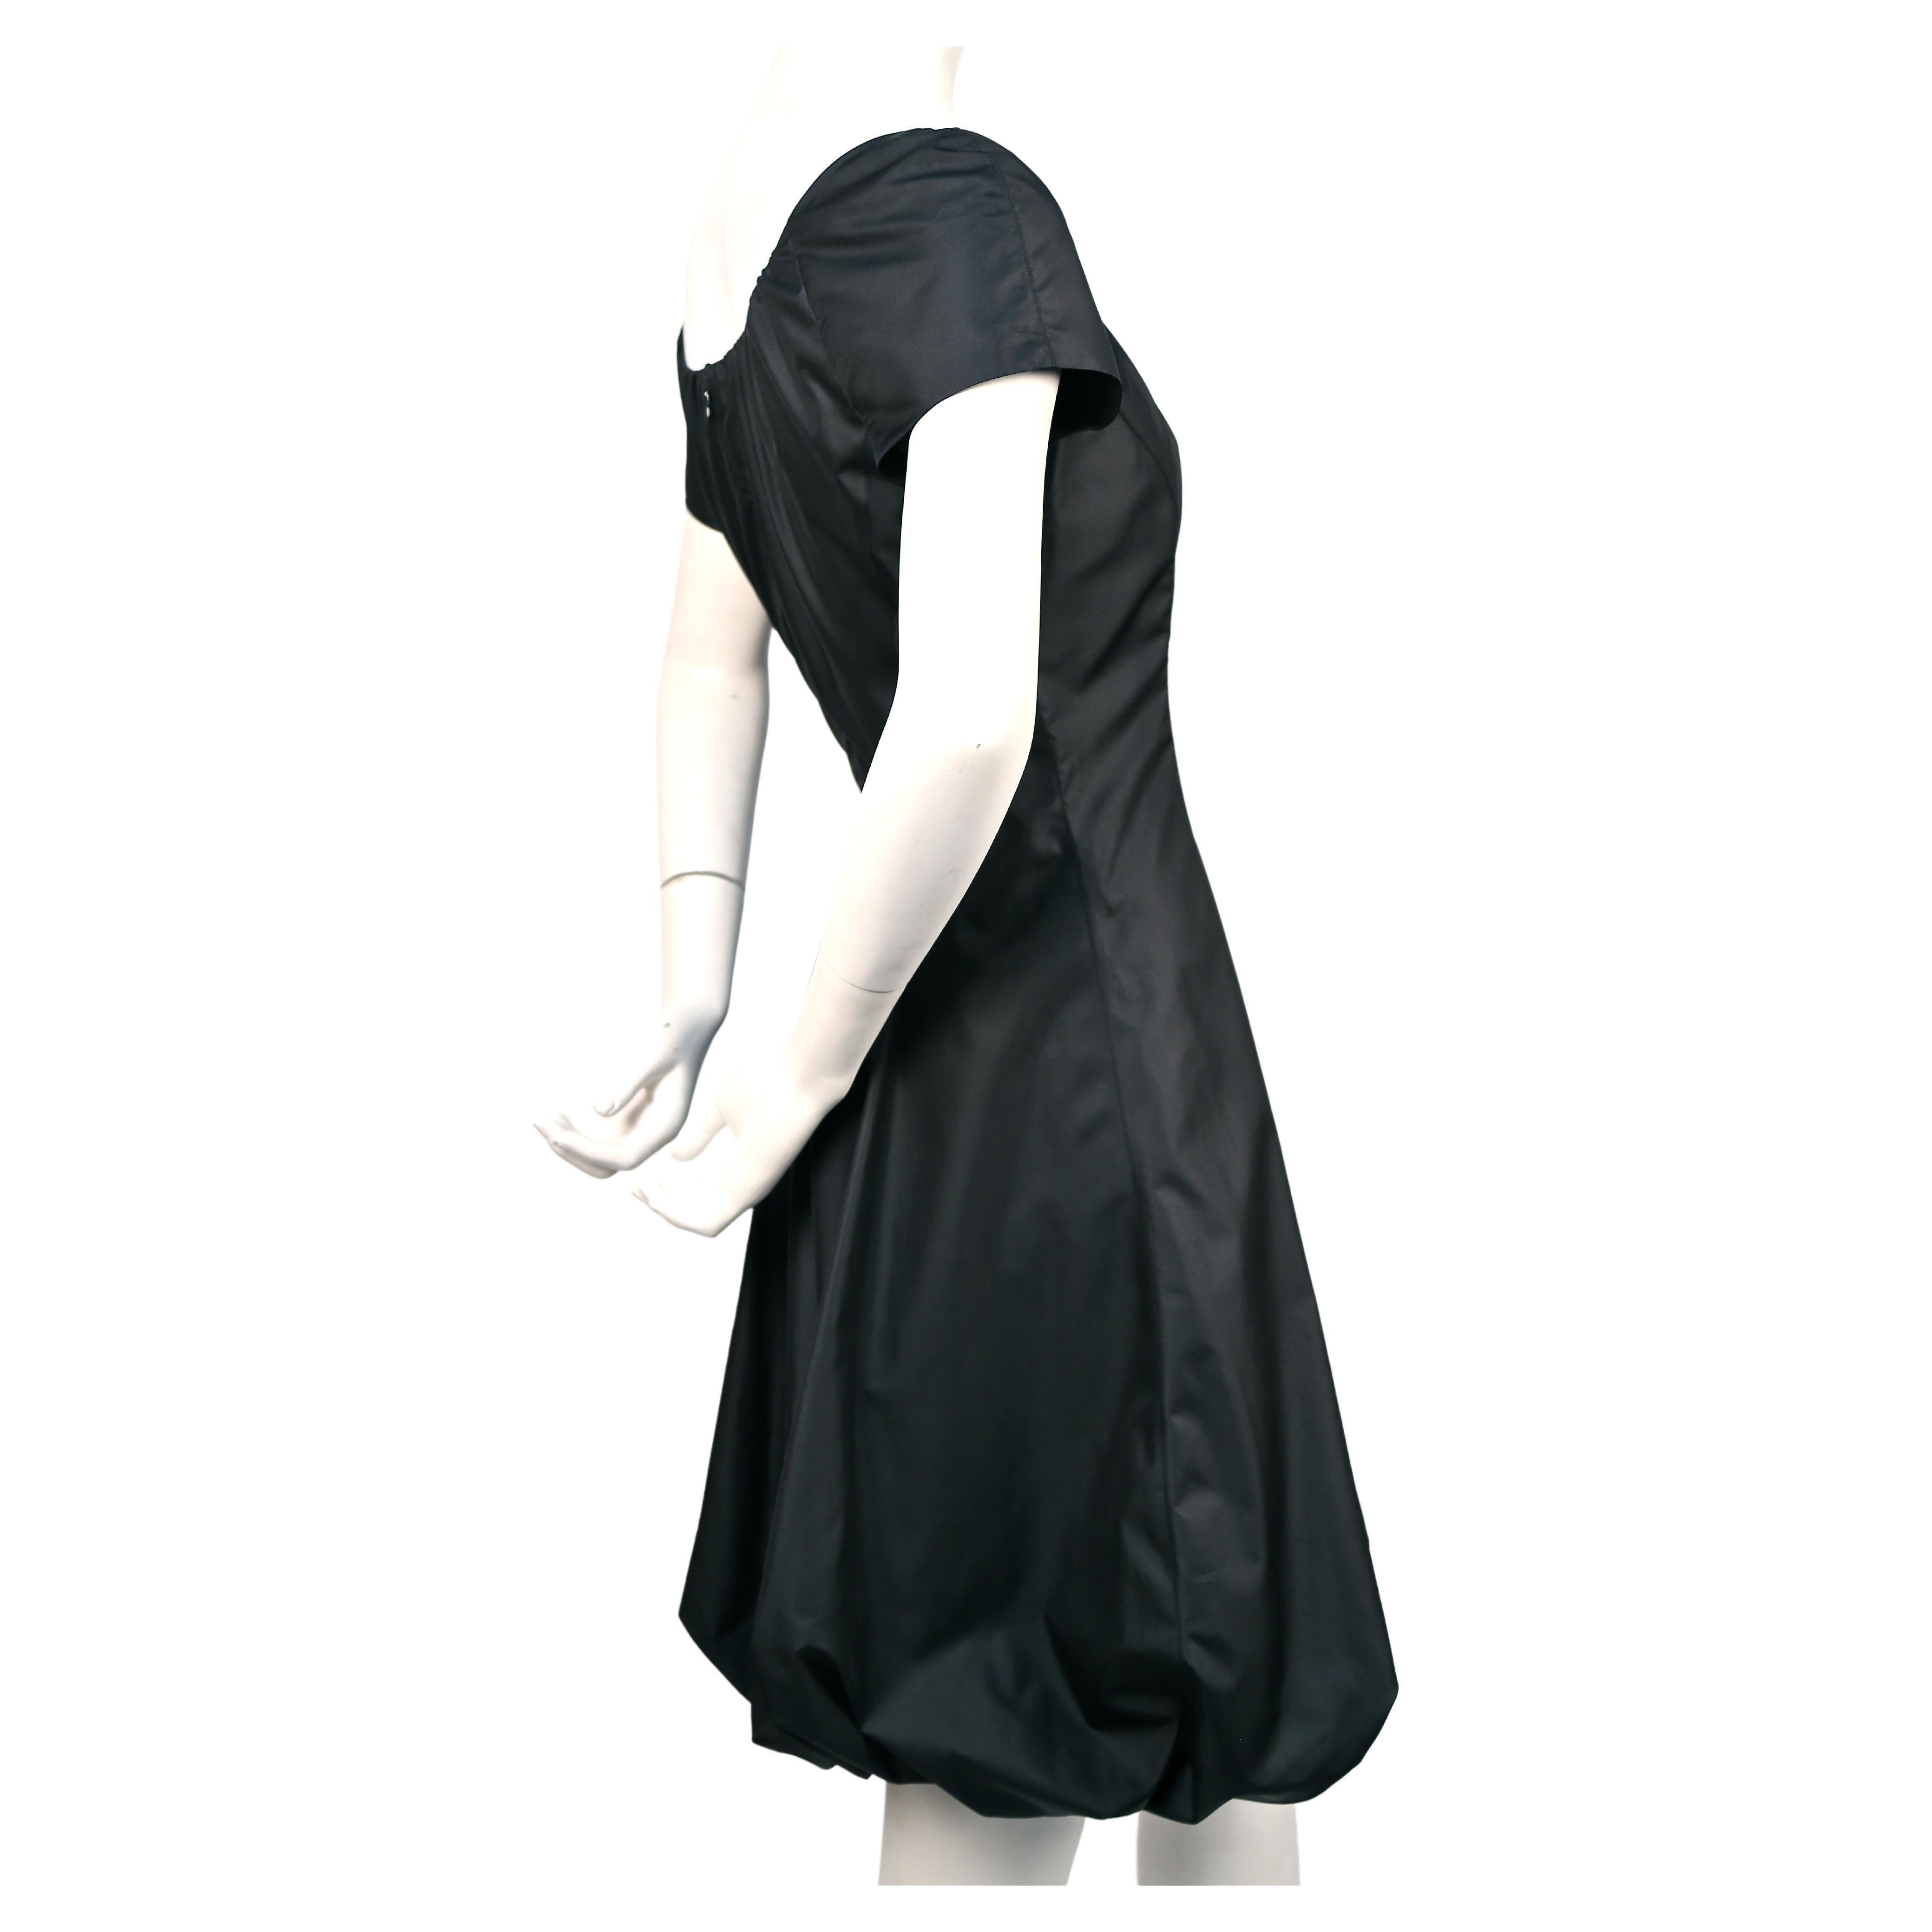 Jet-black, silk dress with gathered neckline and bubble hemline from Thierry Mugler dating to the 1990's. Labeled French size 38, which best fits a US 4 or 6. Dress measures approximately: 36